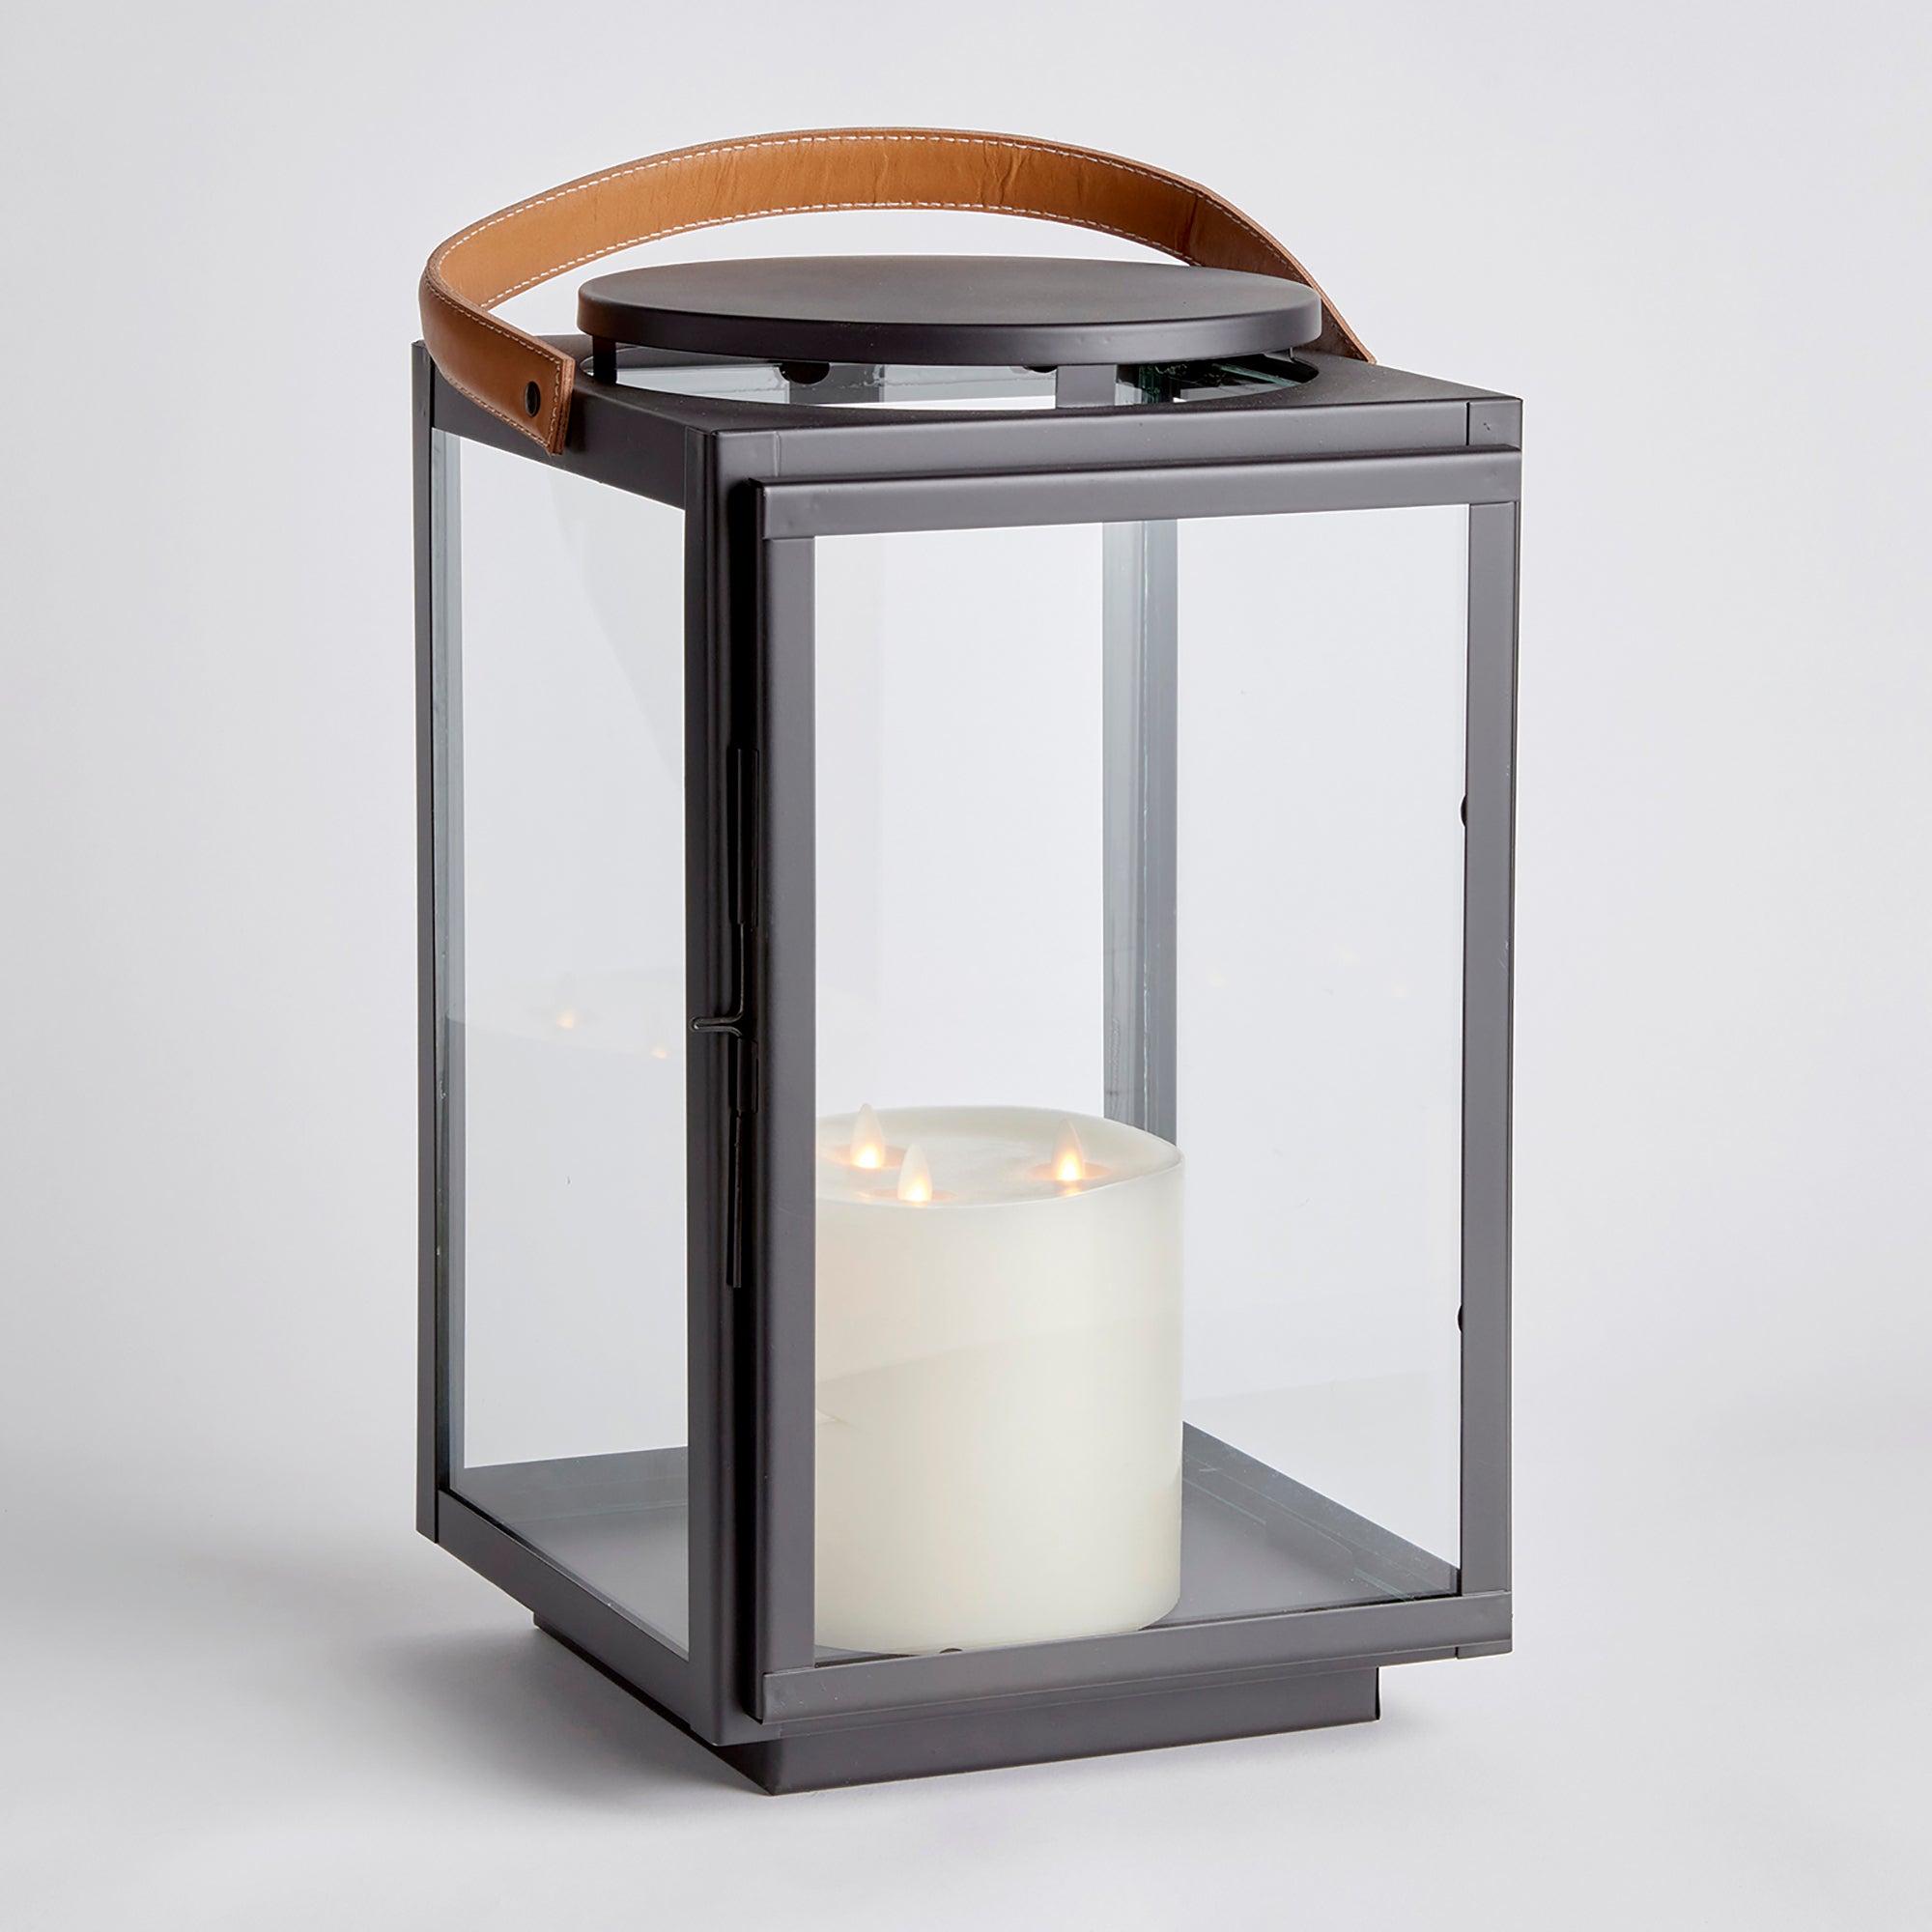 Featuring a real leather handle with tailored stitching, this well-scaled lantern is a mix of traditional and modern aesthetics. A beautiful accent for entryway, living room or study. Amethyst Home provides interior design, new construction, custom furniture, and area rugs in the Houston metro area.